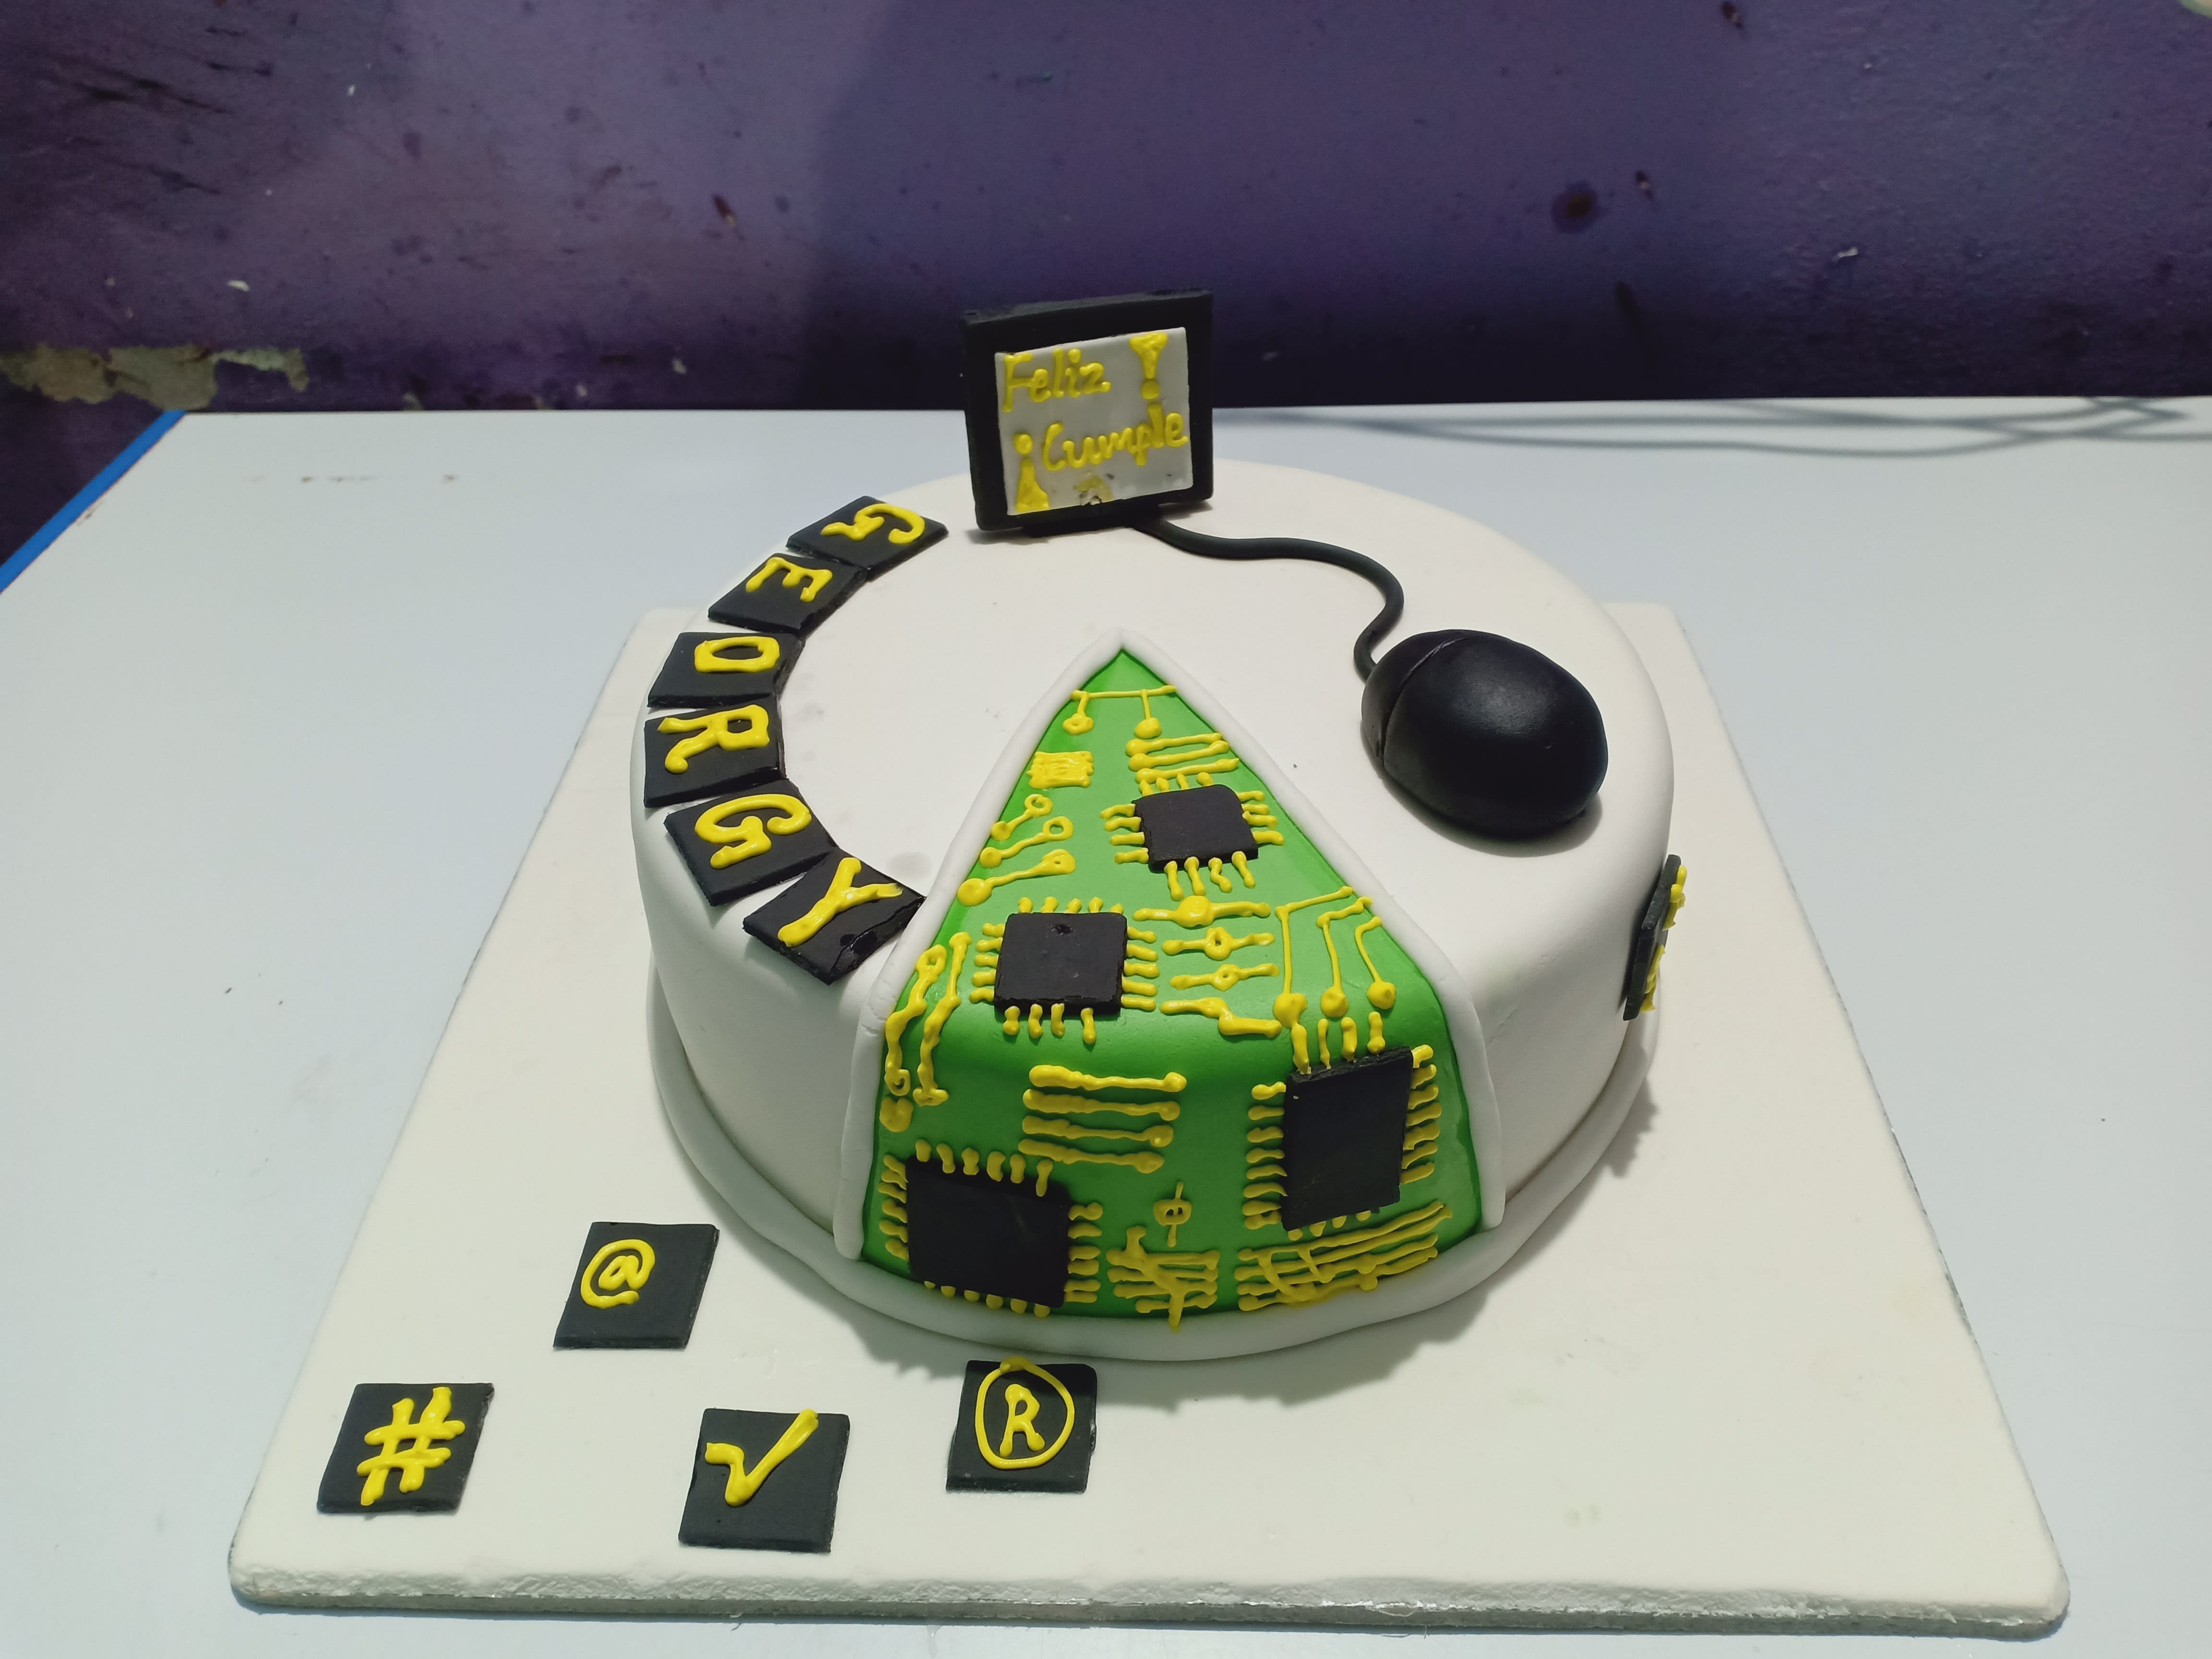 IT Engineer Theme Cake Designs & Images